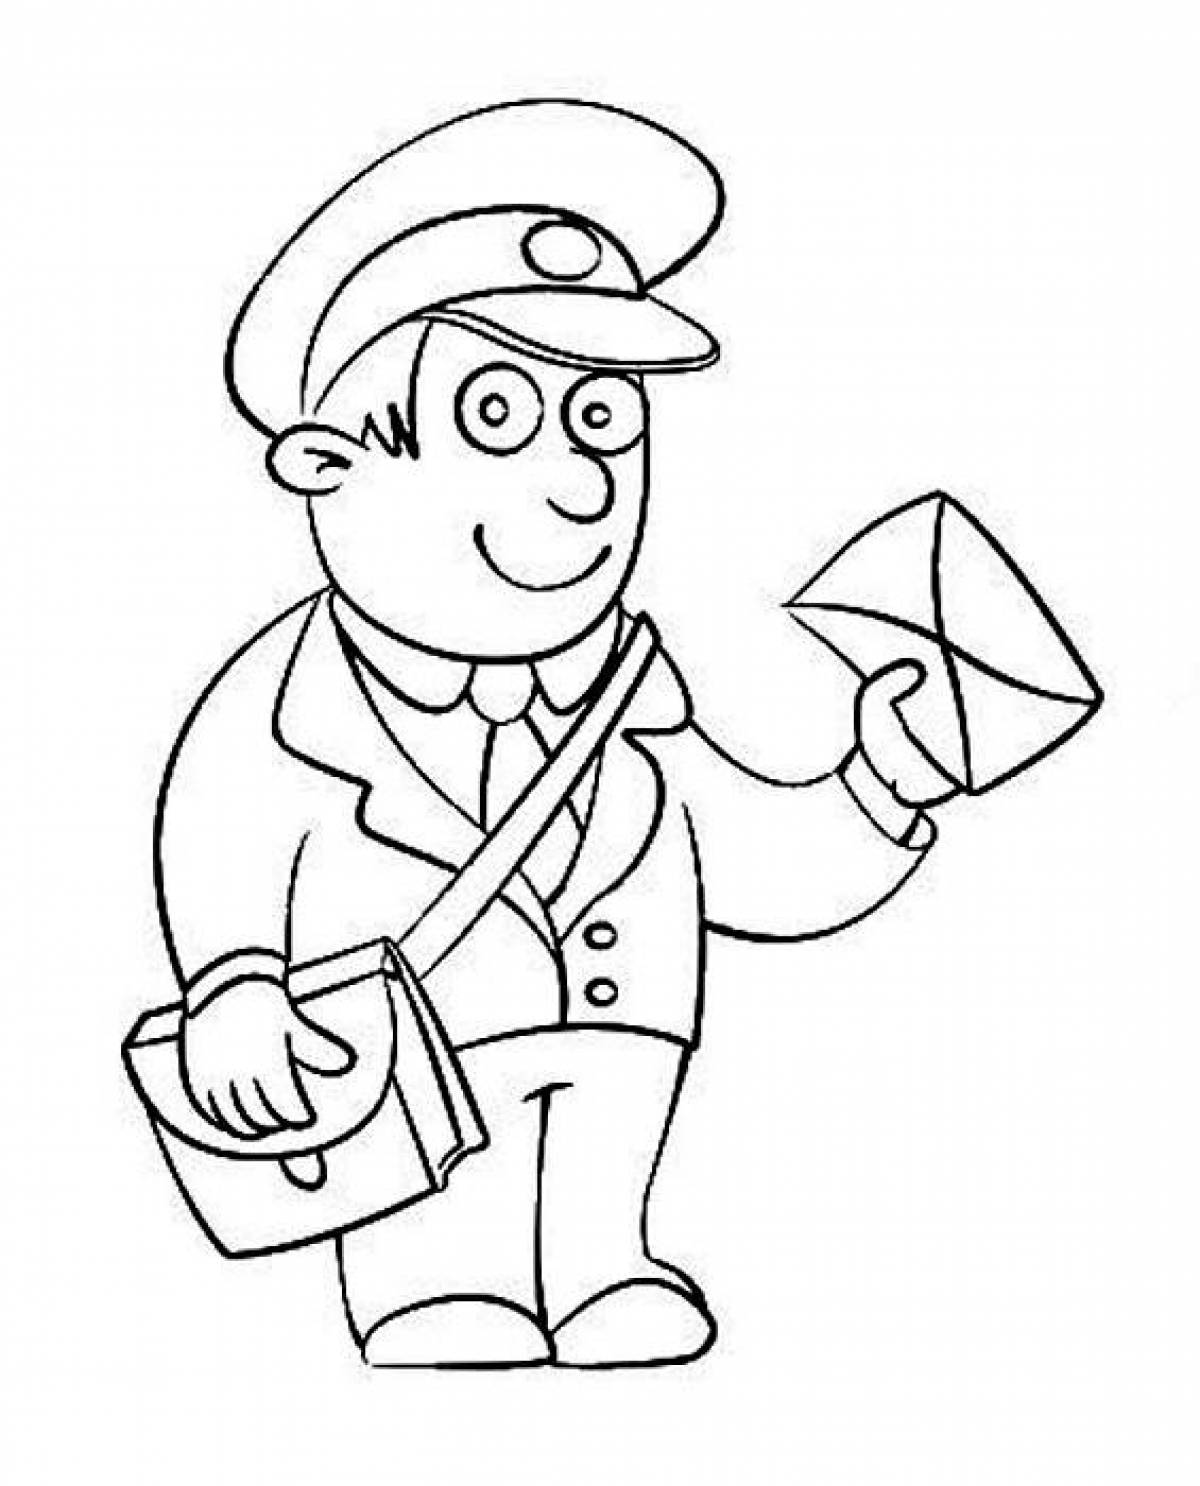 Mail coloring page color-frenzy